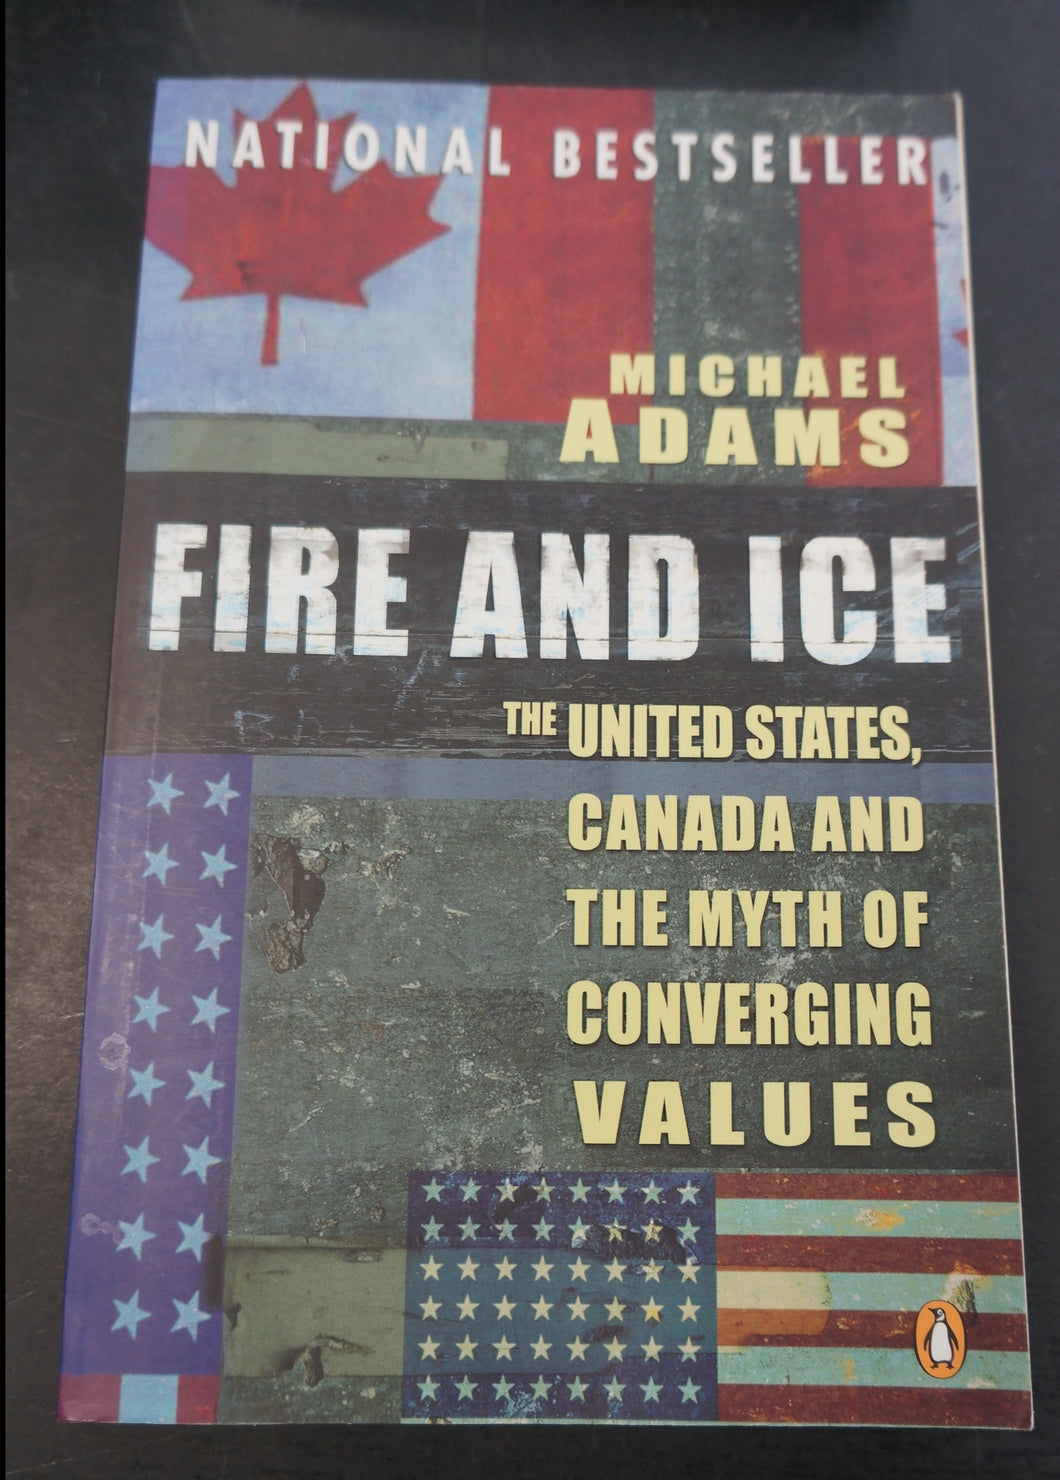 Fire and Ice: The United States, Canada and the Myth of Converging Values by Michael Adams